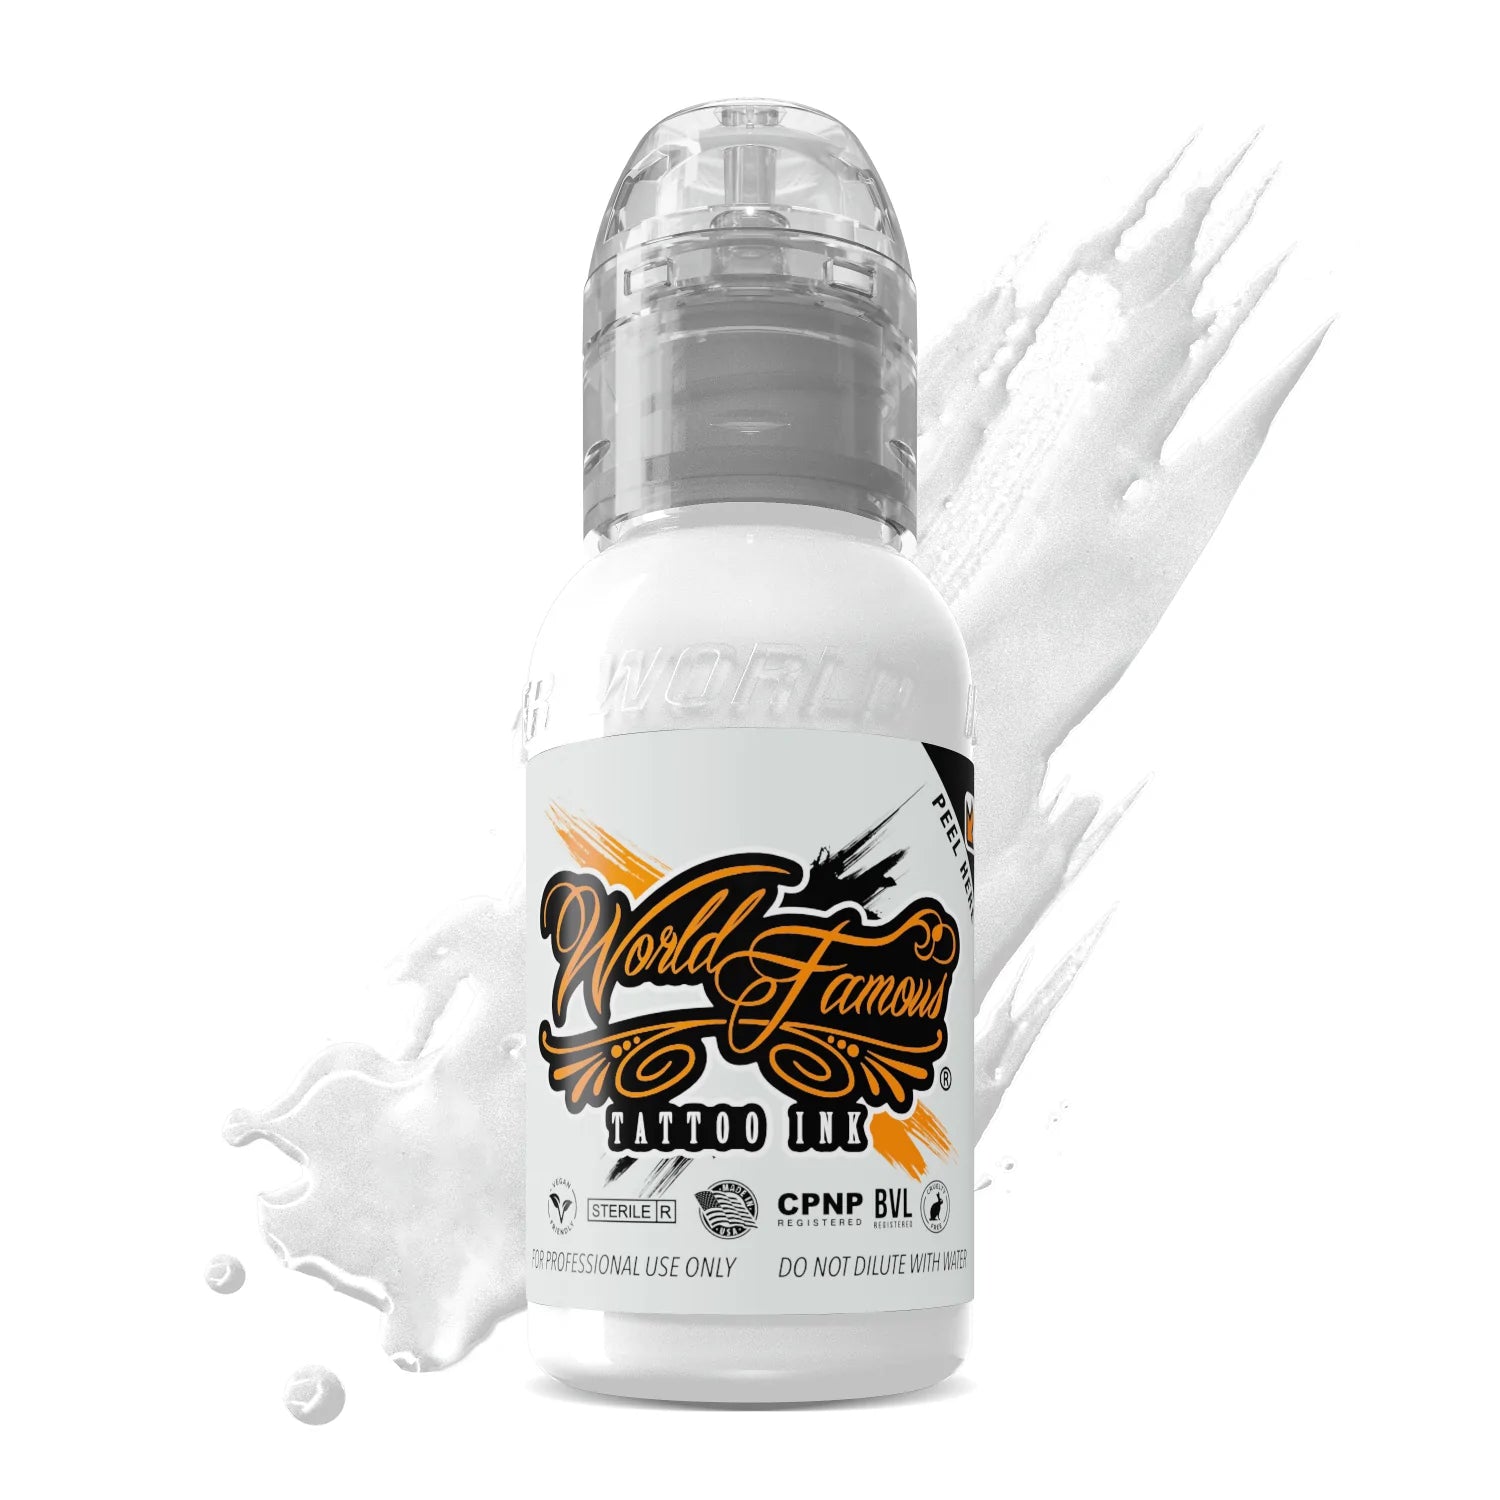 World Famous - Portrait White - Ultimate Tattoo Supply